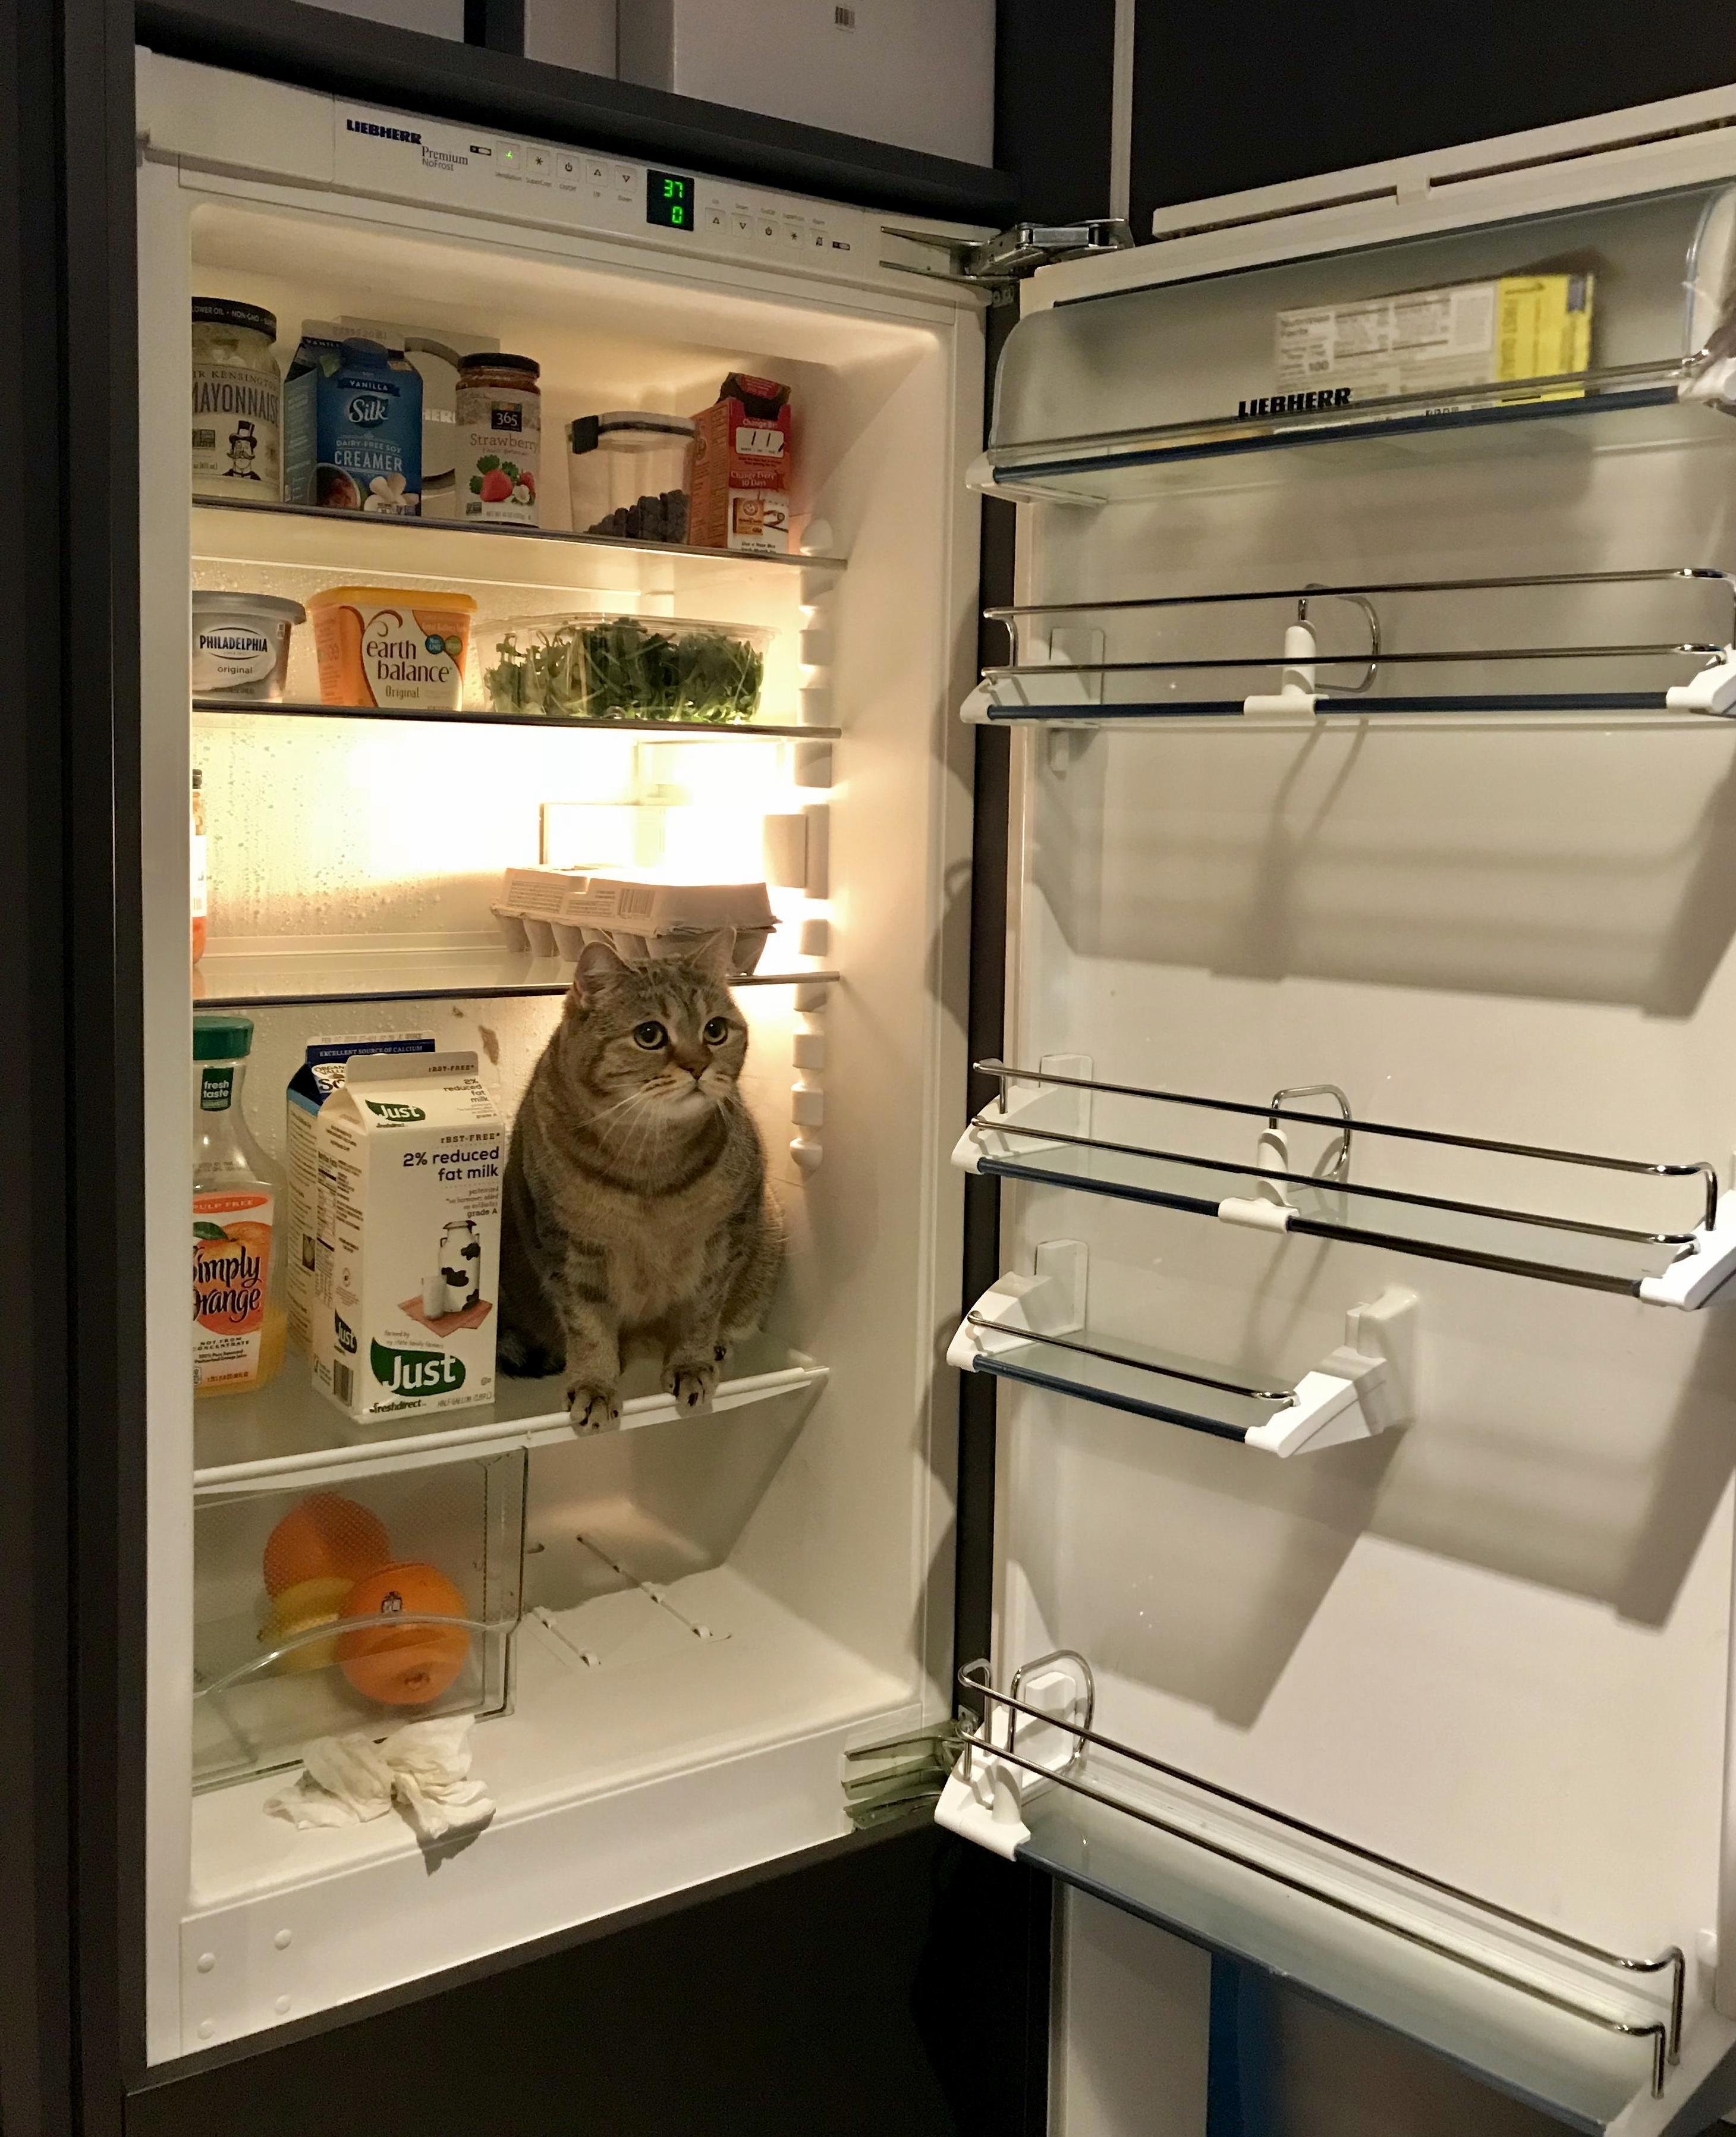 Every time i clean the fridge he decides he wants to help out…